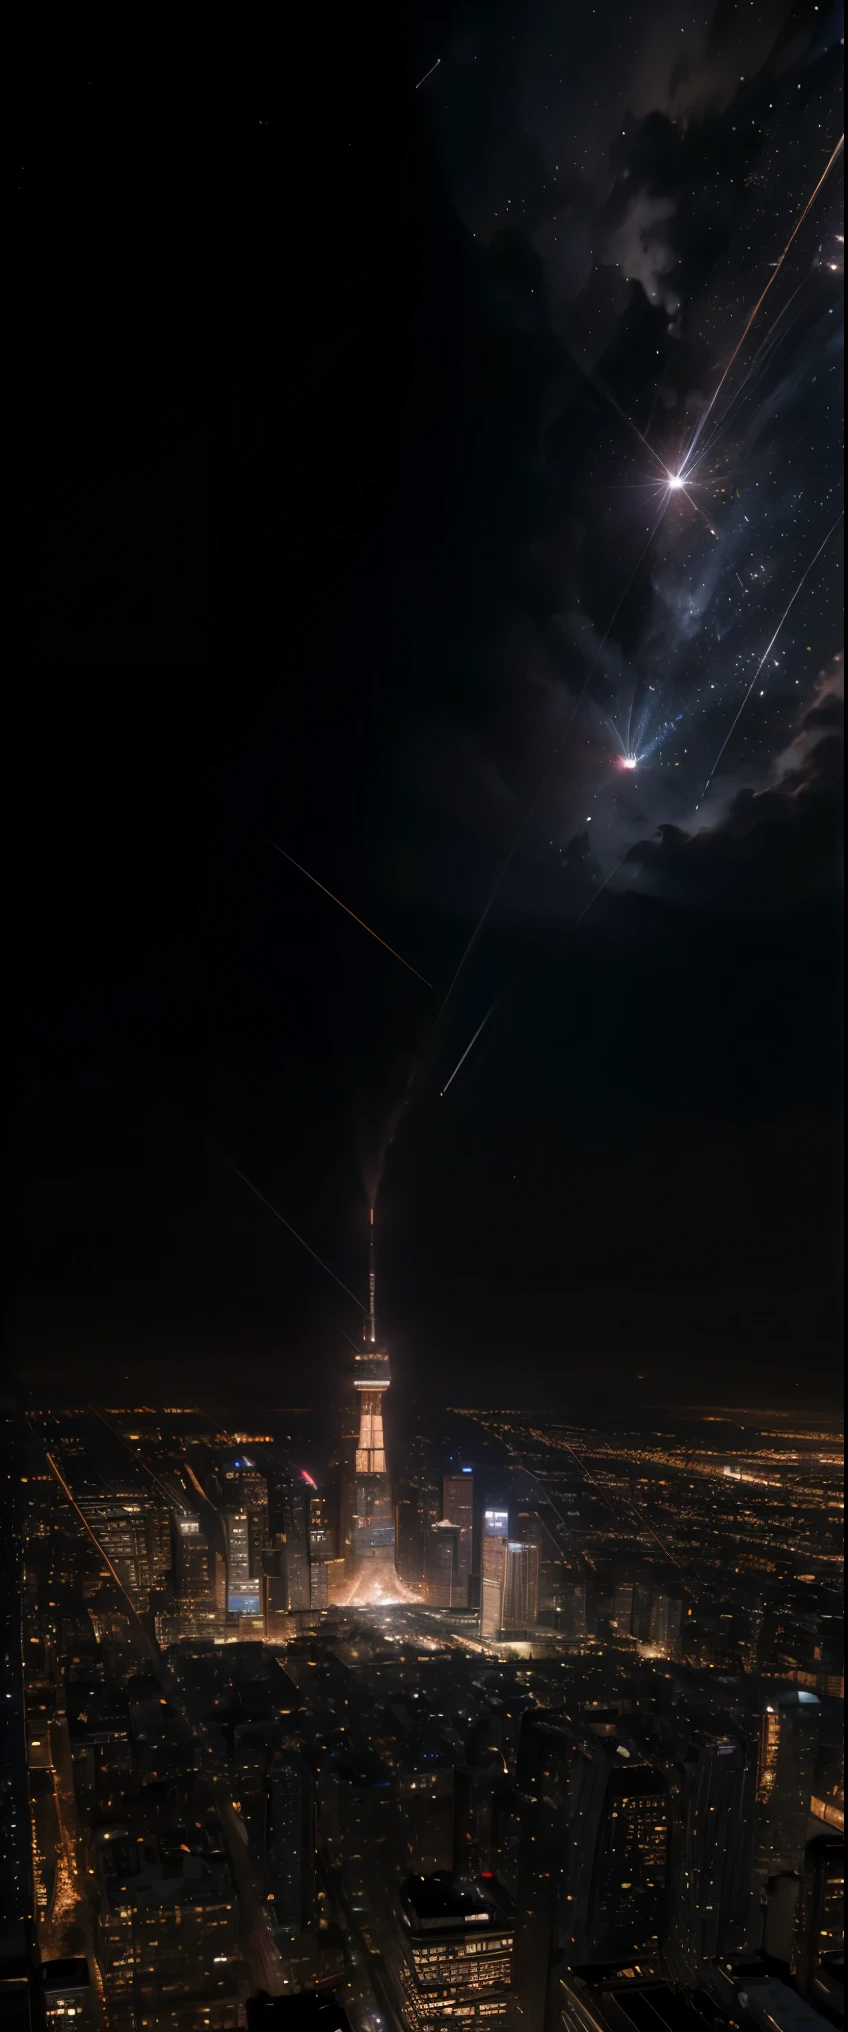 ((masterpiece, highest quality, Highest image quality, High resolution, photorealistic, Raw photo, 8K)), Meteorites rain down on the city from the night sky,